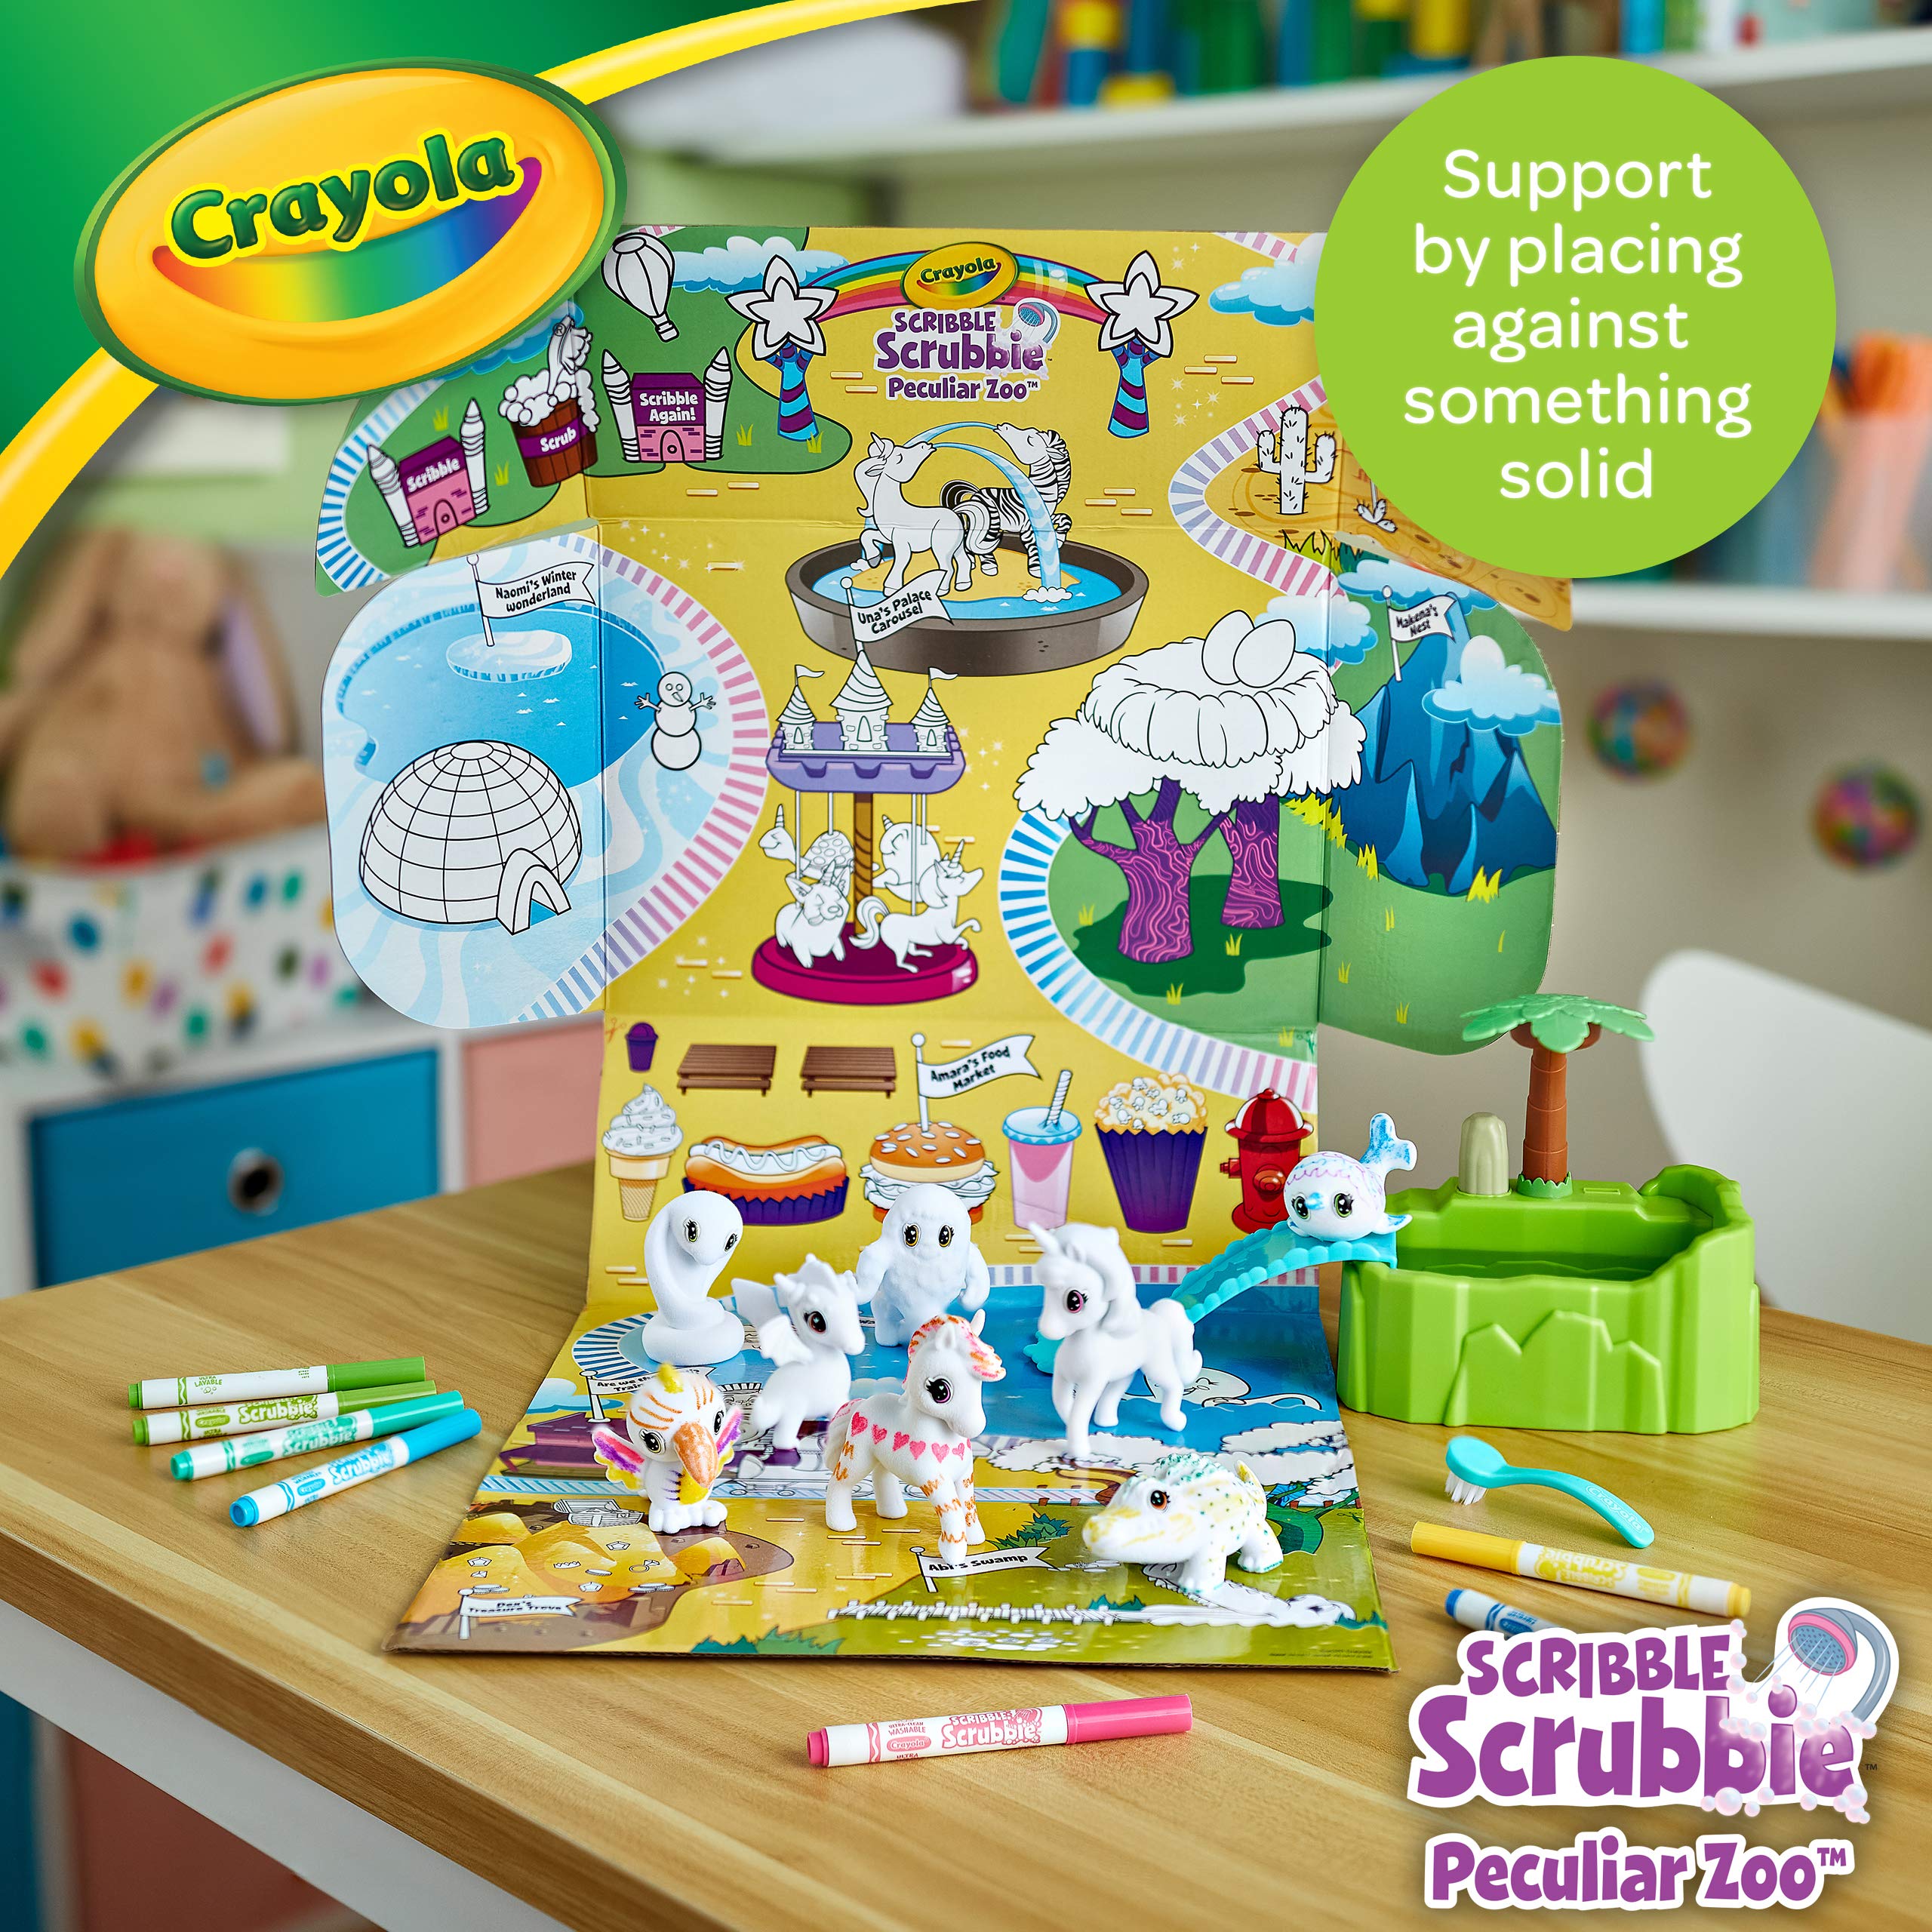 Crayola Scribble Scrubbie Peculiar Zoo, Amazon Exclusive, Kids Toy, Gift for Kids, Ages 3, 4, 5, 6